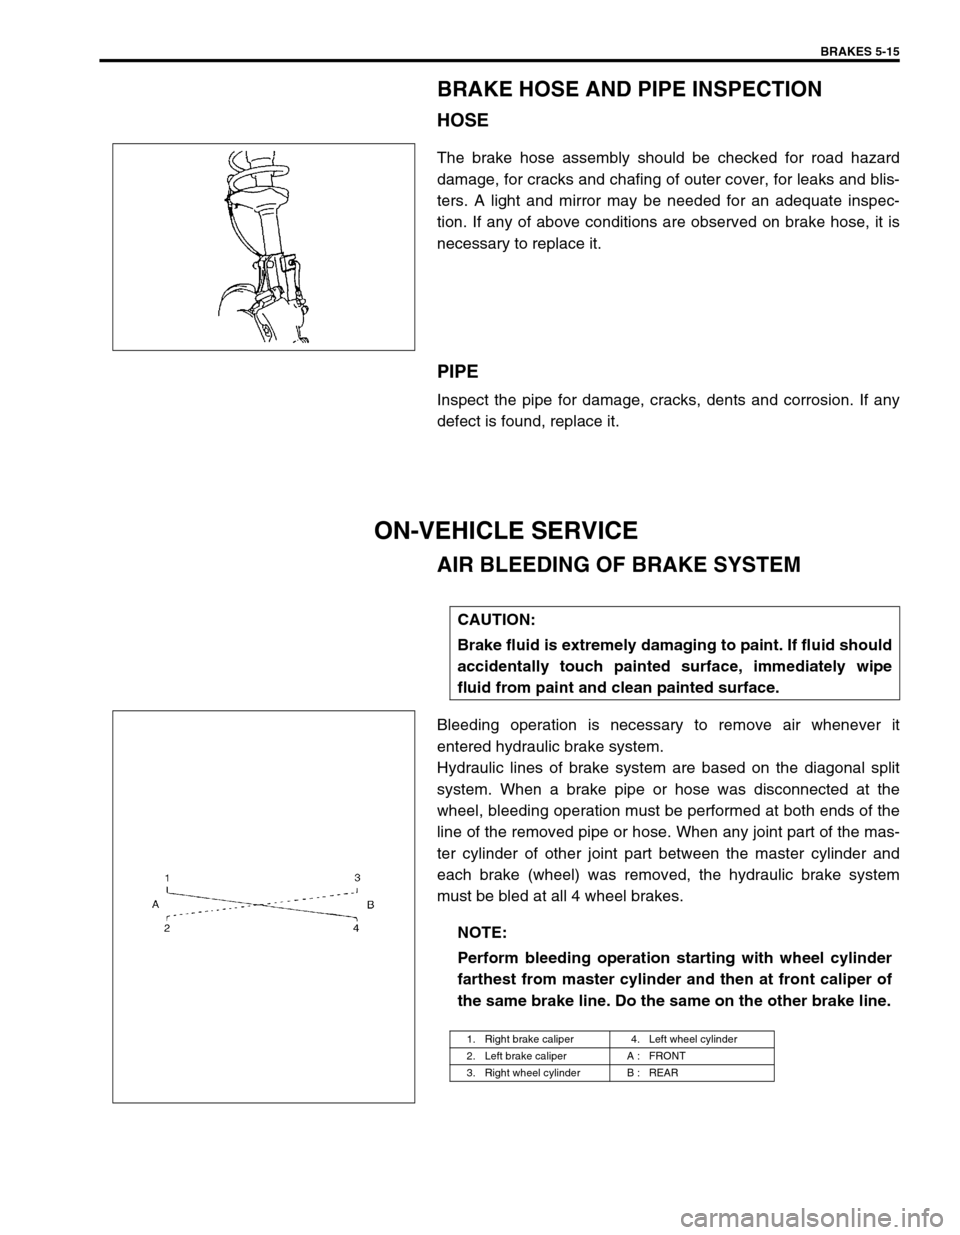 SUZUKI SWIFT 2000 1.G RG413 Service Workshop Manual BRAKES 5-15
BRAKE HOSE AND PIPE INSPECTION
HOSE
The brake hose assembly should be checked for road hazard
damage, for cracks and chafing of outer cover, for leaks and blis-
ters. A light and mirror ma